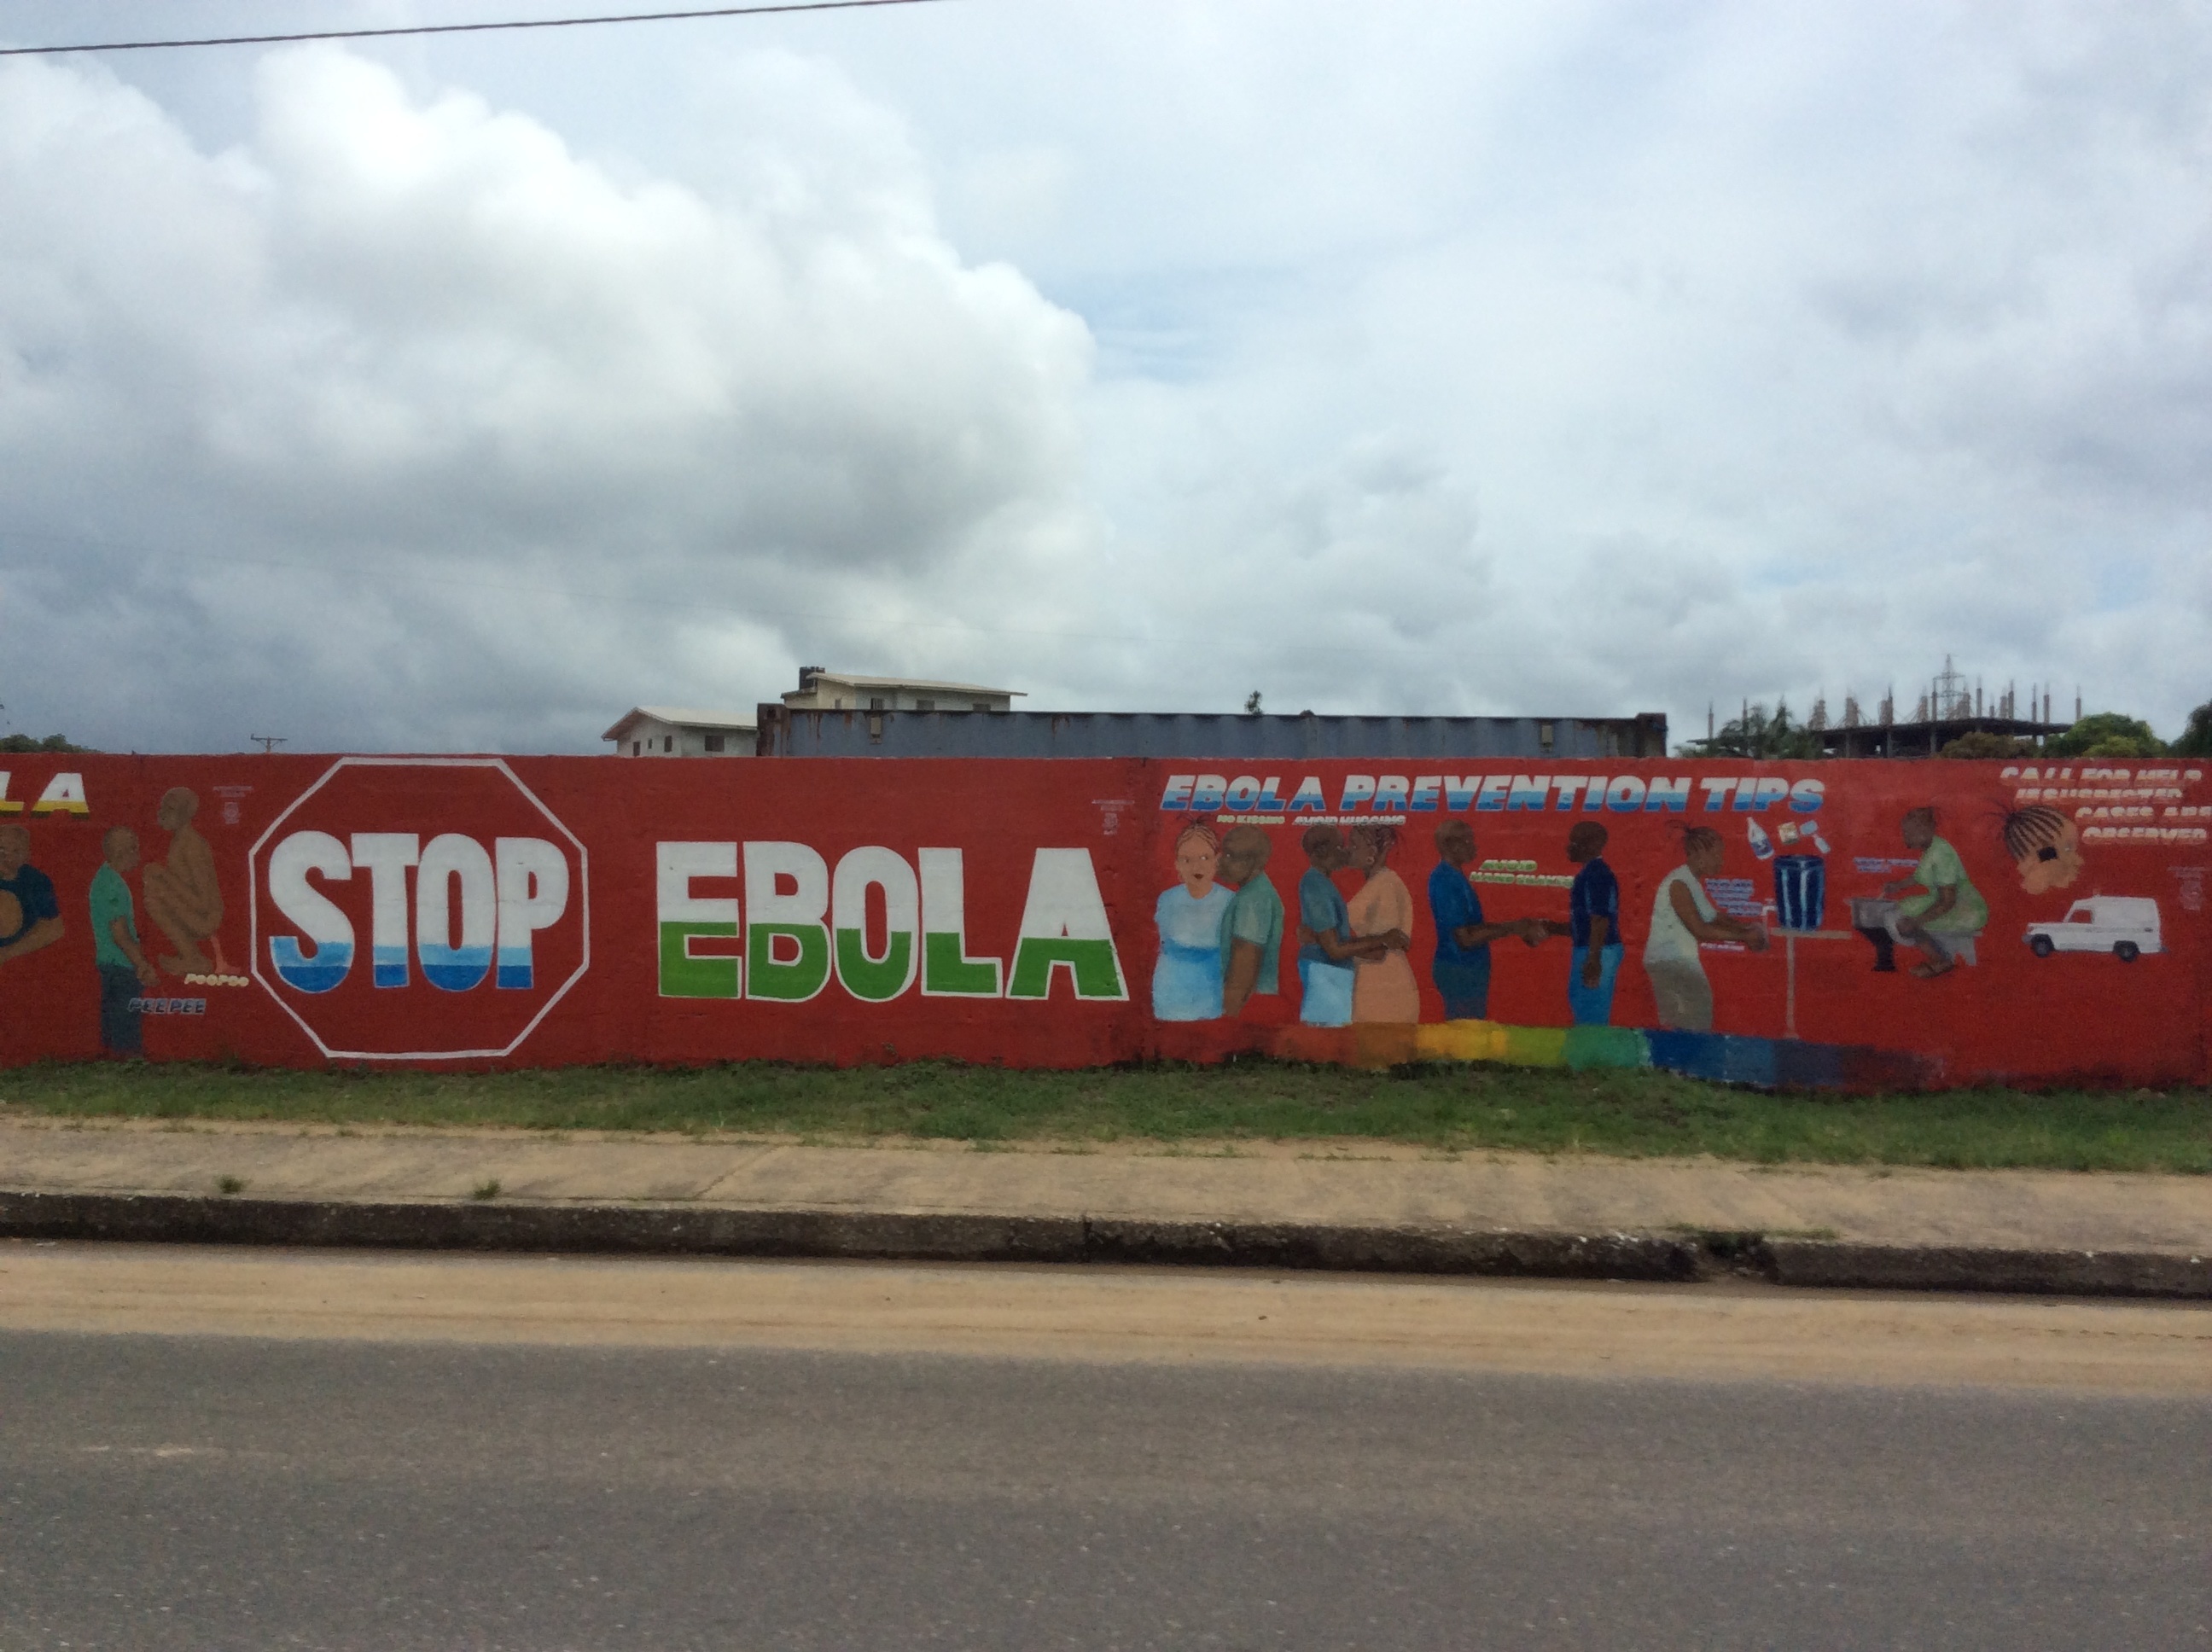 A mural at the outskirts of Monrovia, Liberia, during the Ebola outbreak that affected thousands of Liberians in 2014 and 2015. Aylward was put in charge of the international response to the outbreak after earlier WHO efforts—hobbled by years of budget and staffing cuts—were criticized as tentative and inadequate. (U.S. Army photo by U.S. Army Corps of Engineers, Savannah District)